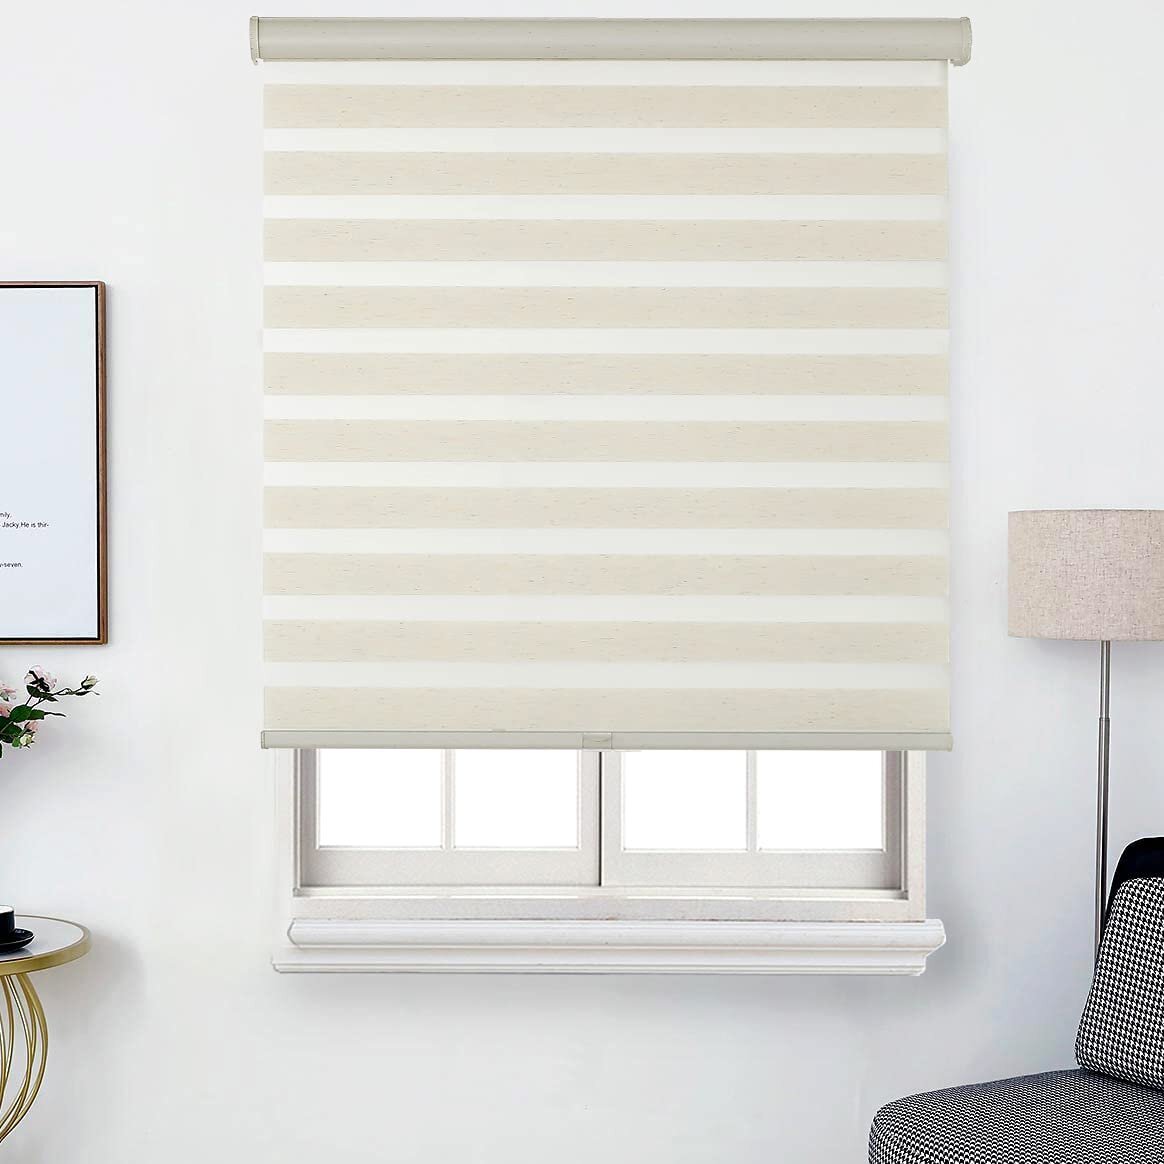 34"x72" Cordless Window Roller Shades Free-Stop Dual Layer Zebra Blinds 